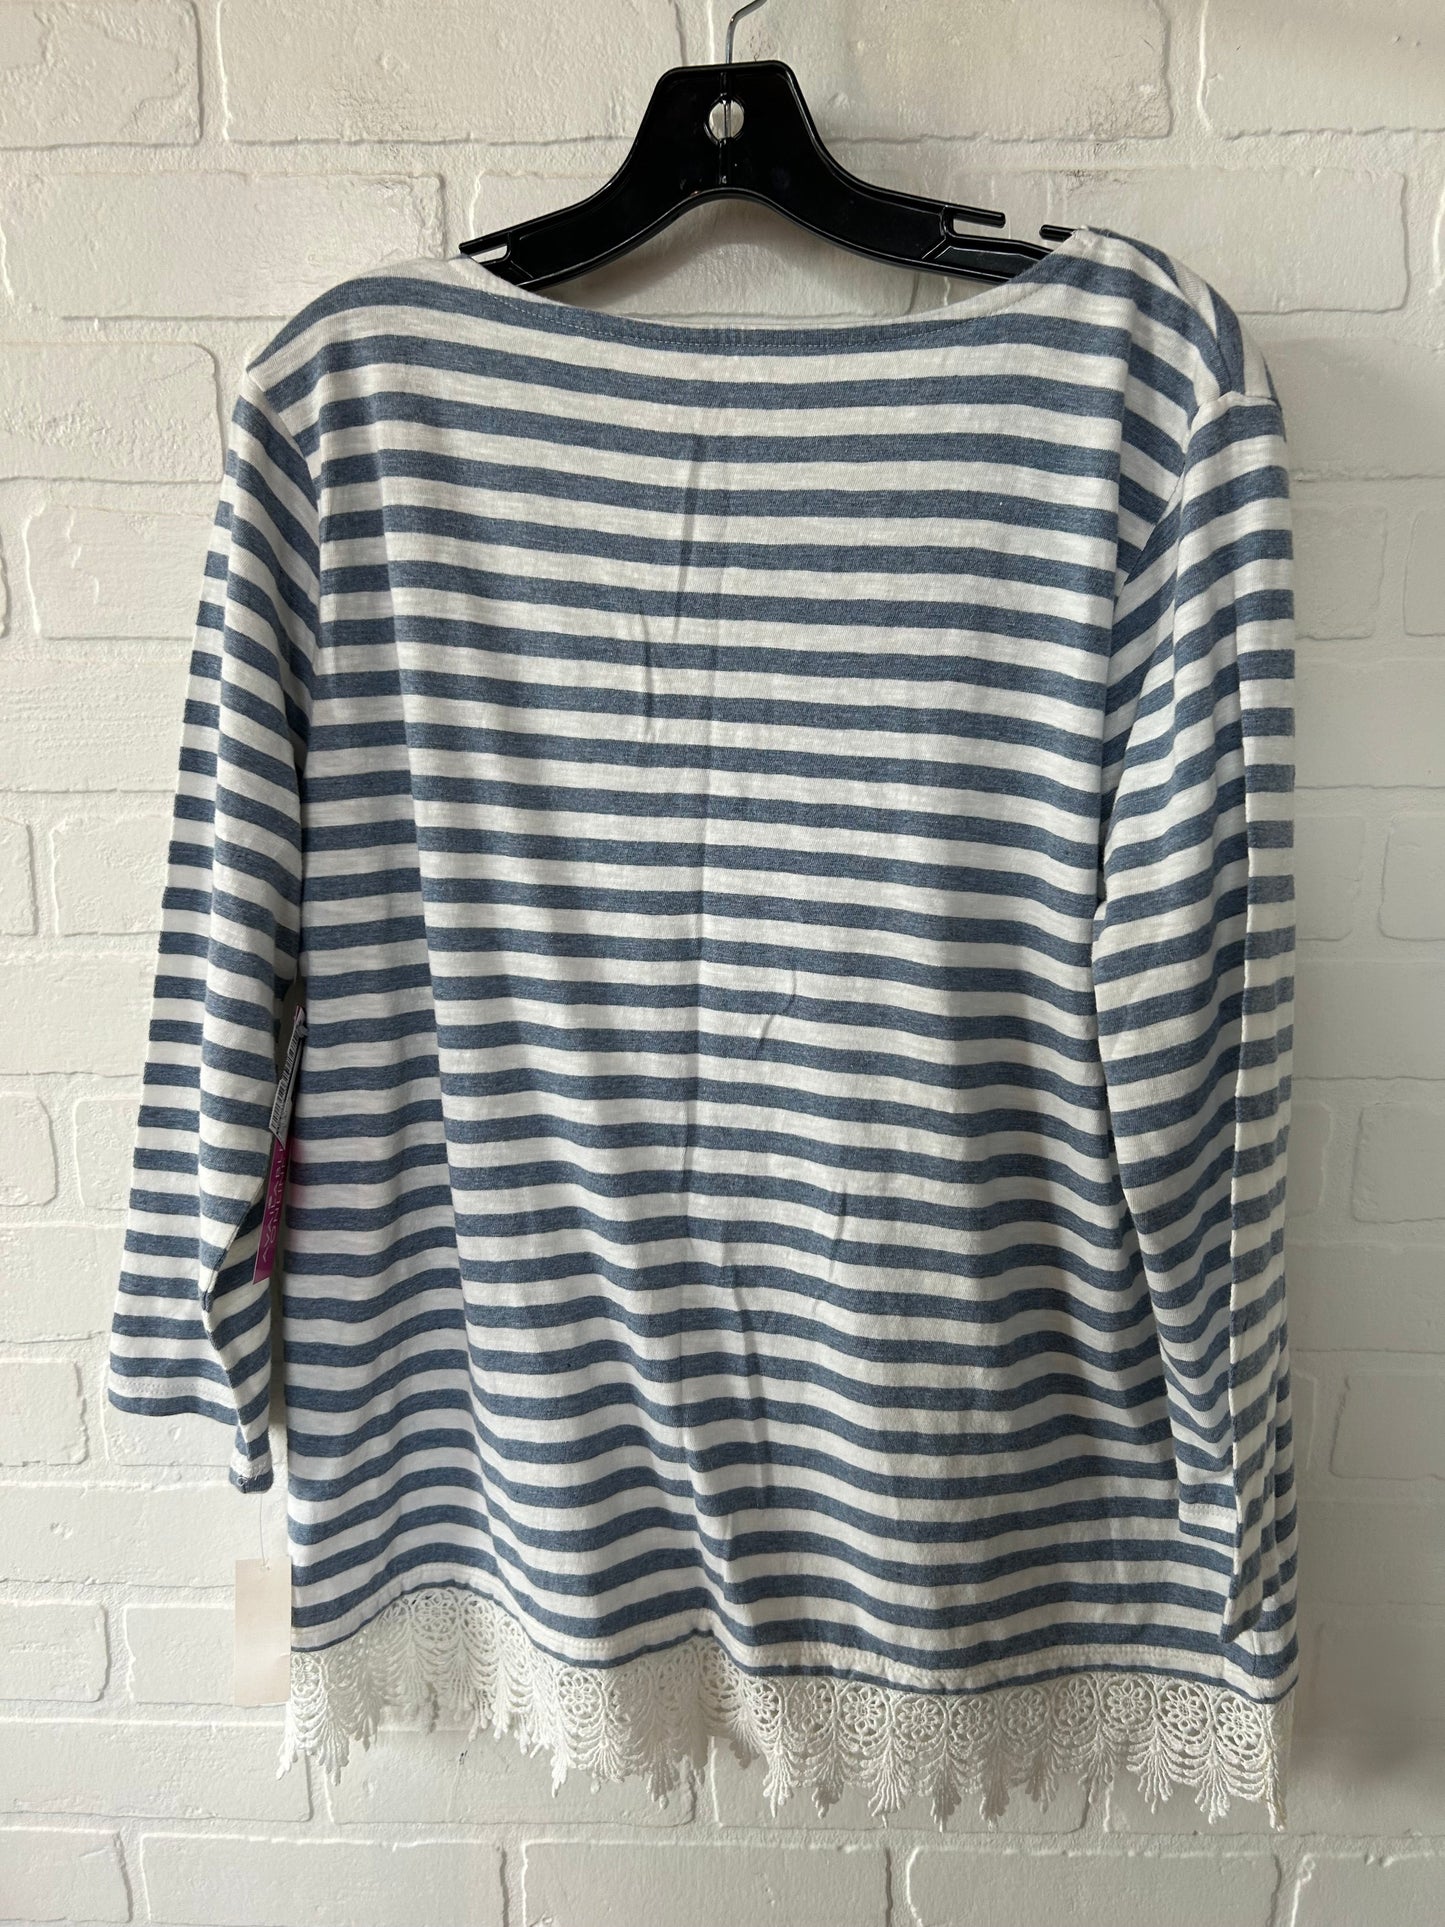 Blue & White Top Long Sleeve Talbots, Size L